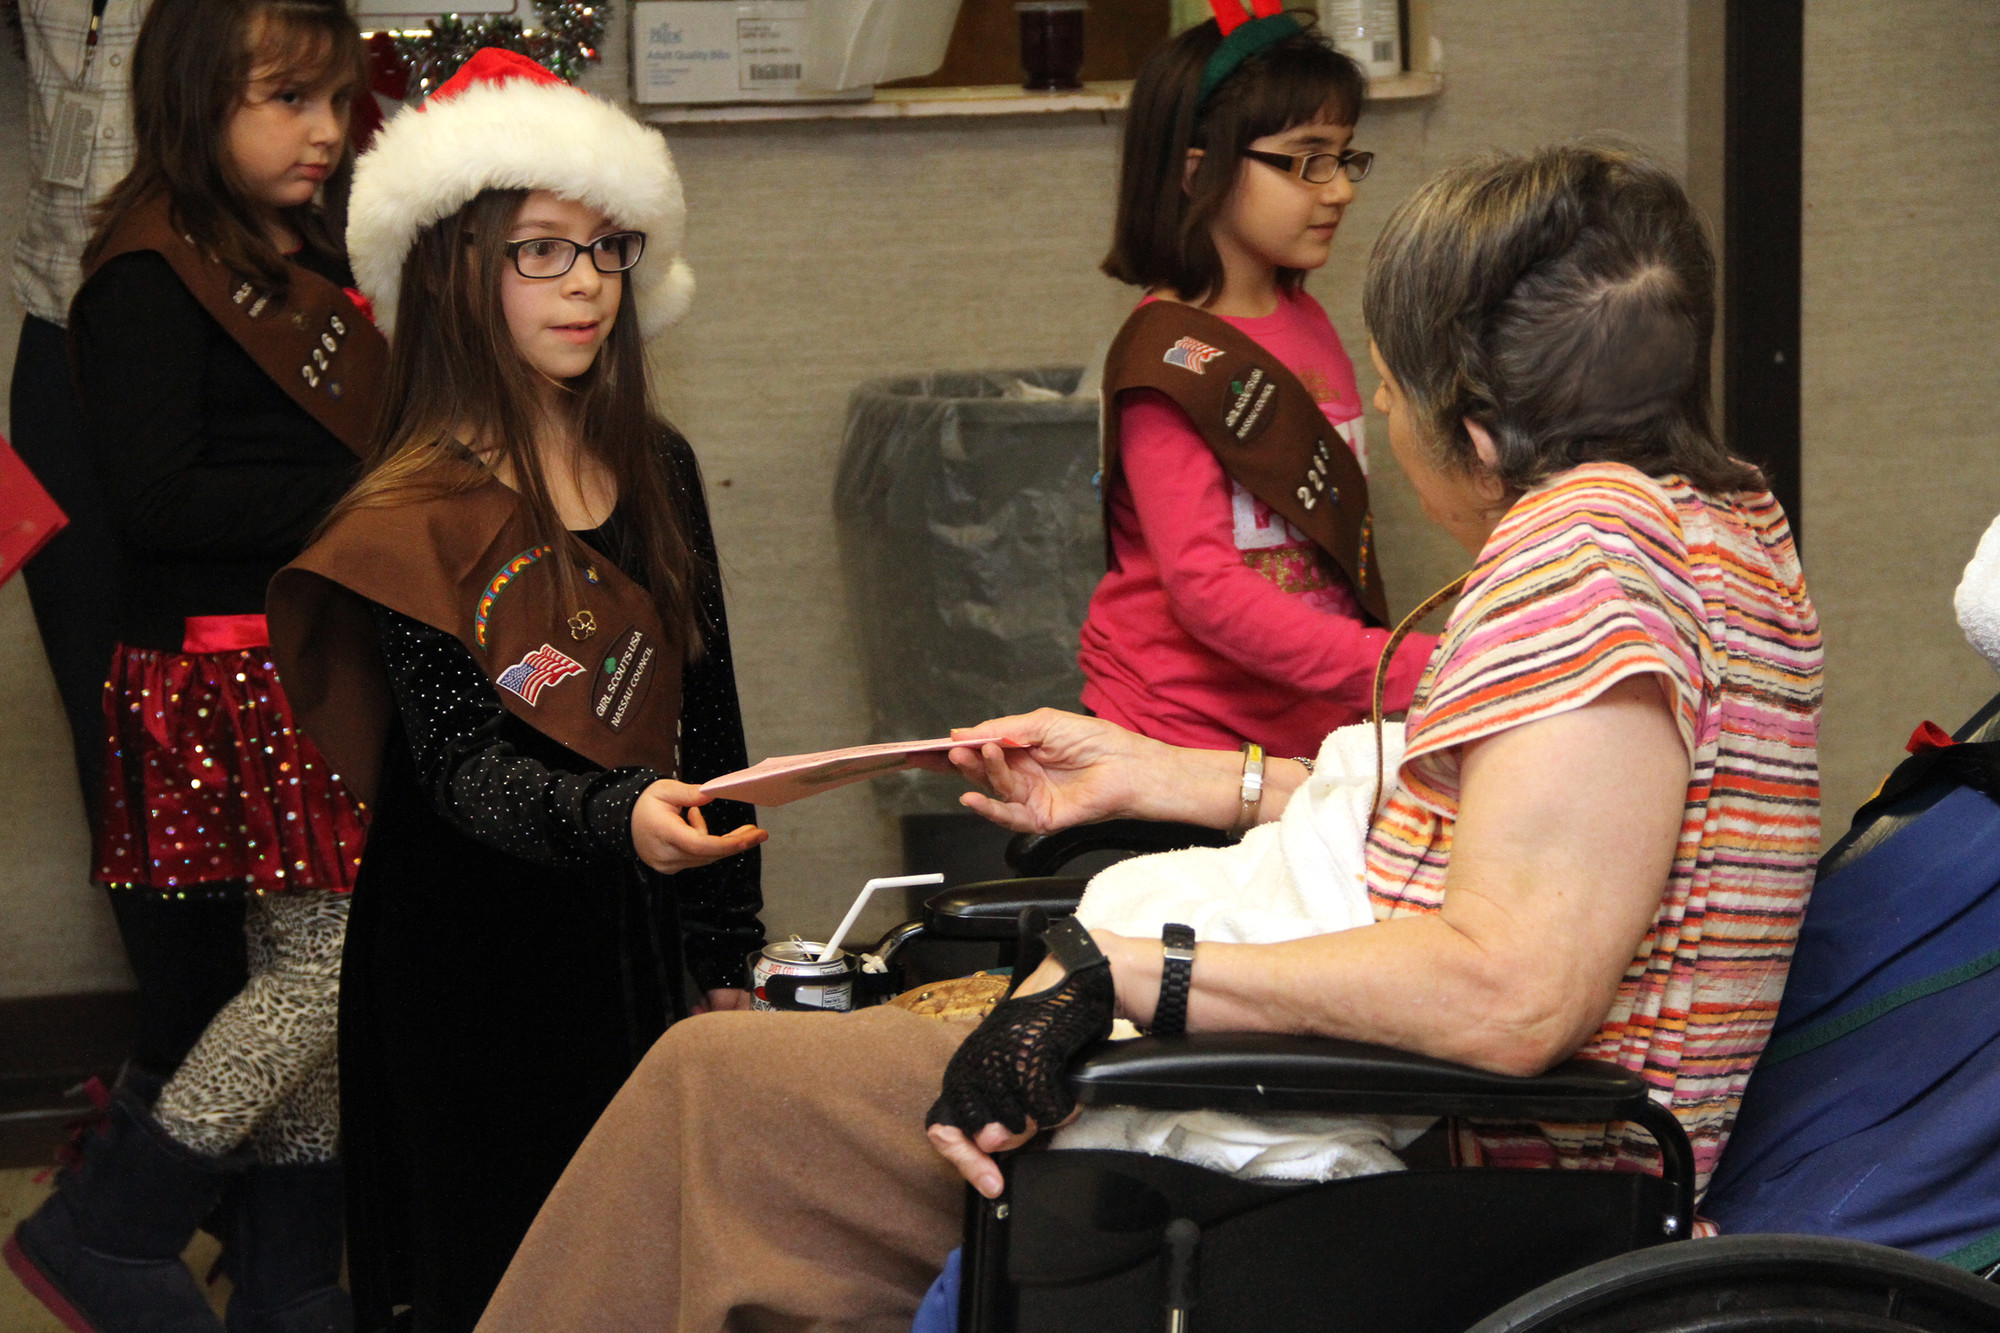 Isabella Palladino handed out homemade Christmas cards.